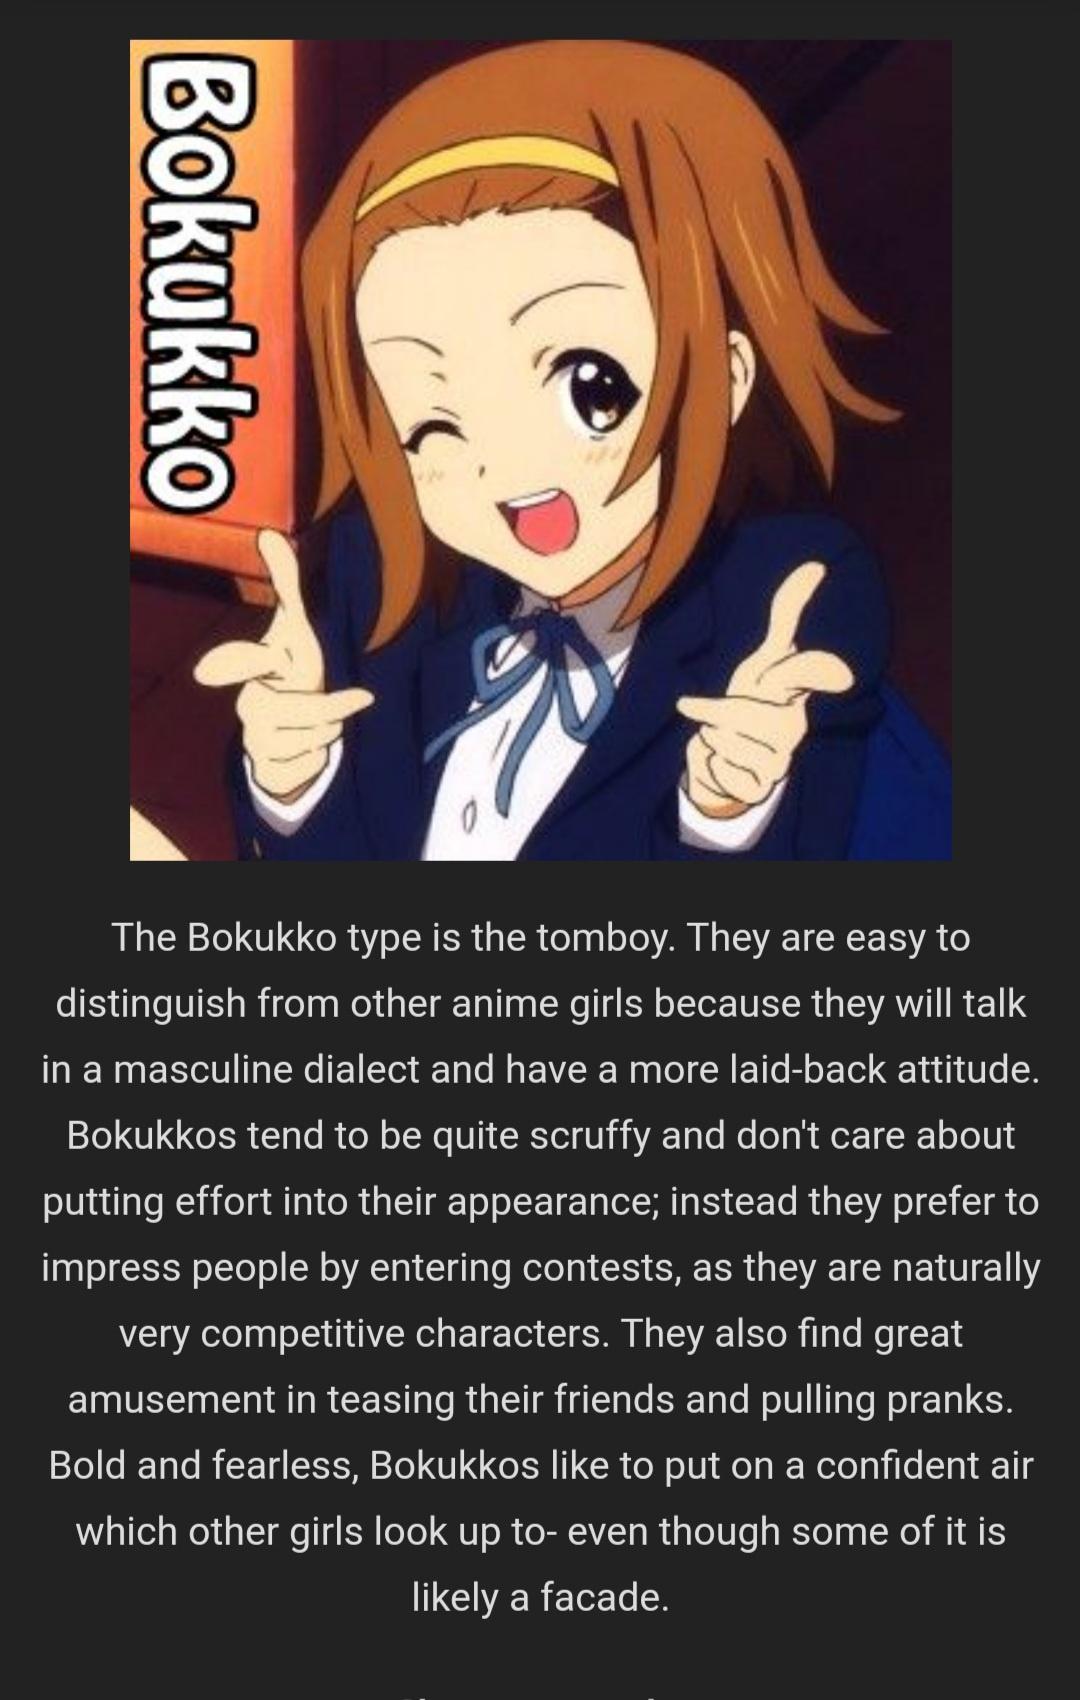 What anime girl stereotype are you?